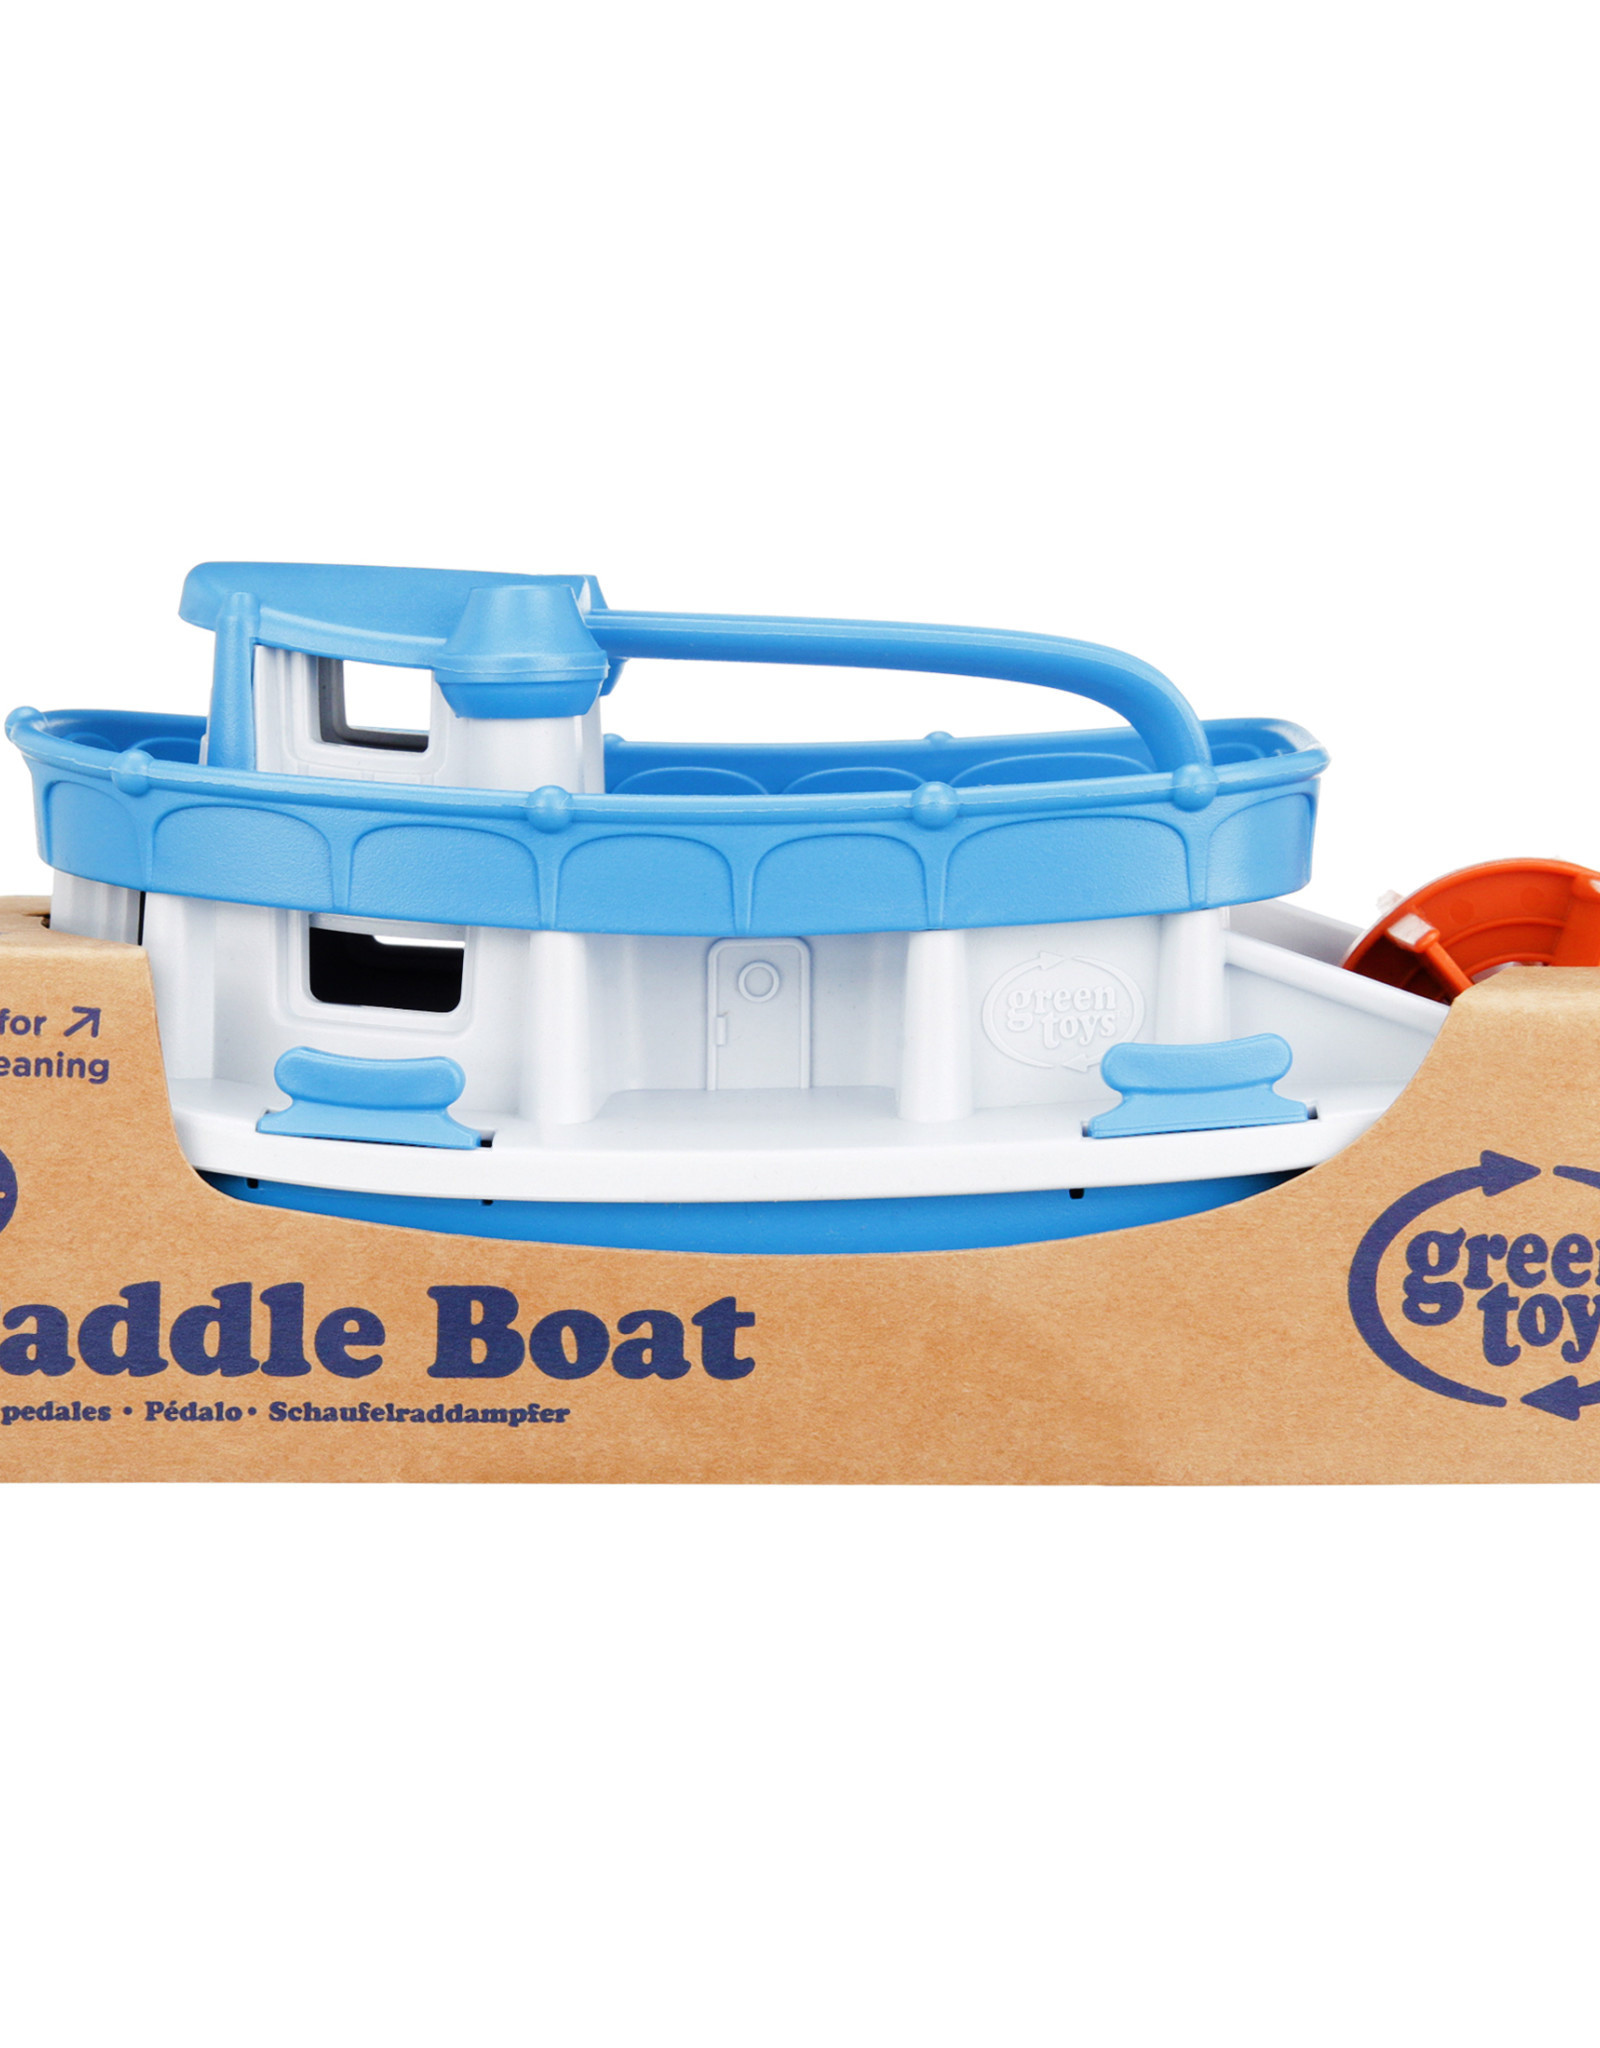 Green Toys Paddle Boat Assorted Colours